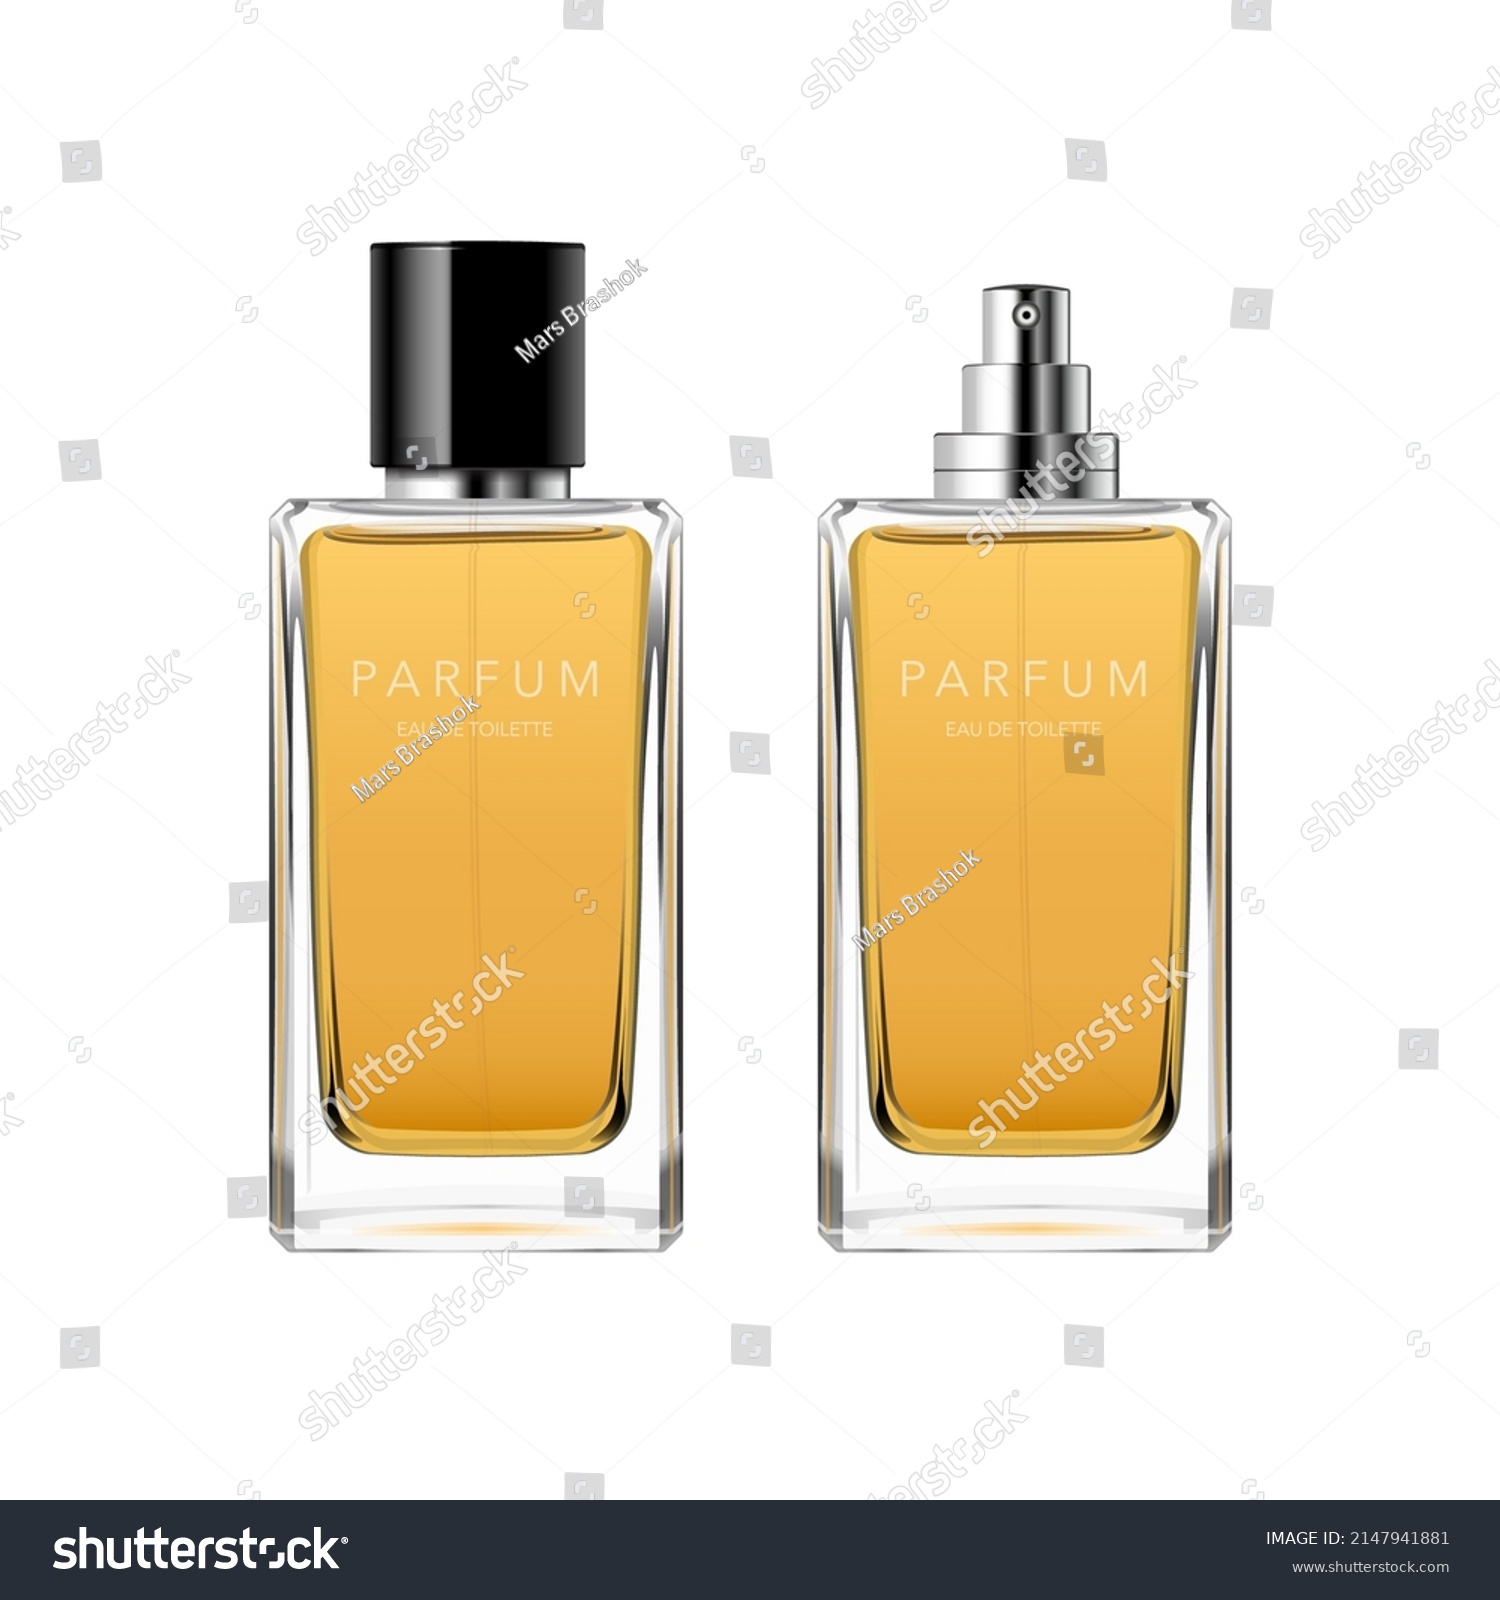 SVG of Perfume glass minimalist bottle. Square niche fragrance packaging with black plastic cap, sprayer, text template, amber liquid. 3d vector mockup for ad and branding. Beauty product illustration. svg